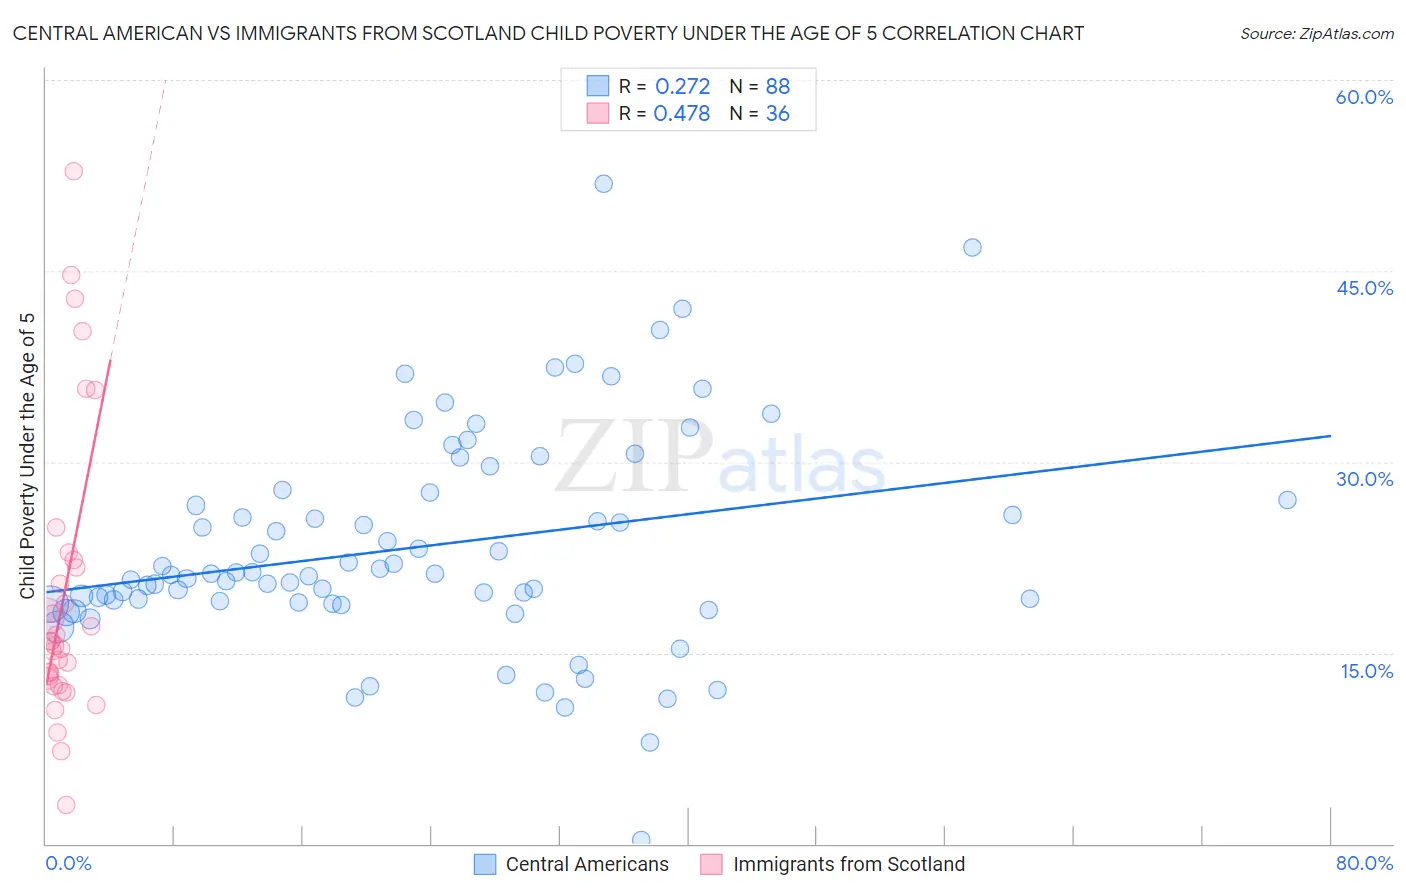 Central American vs Immigrants from Scotland Child Poverty Under the Age of 5